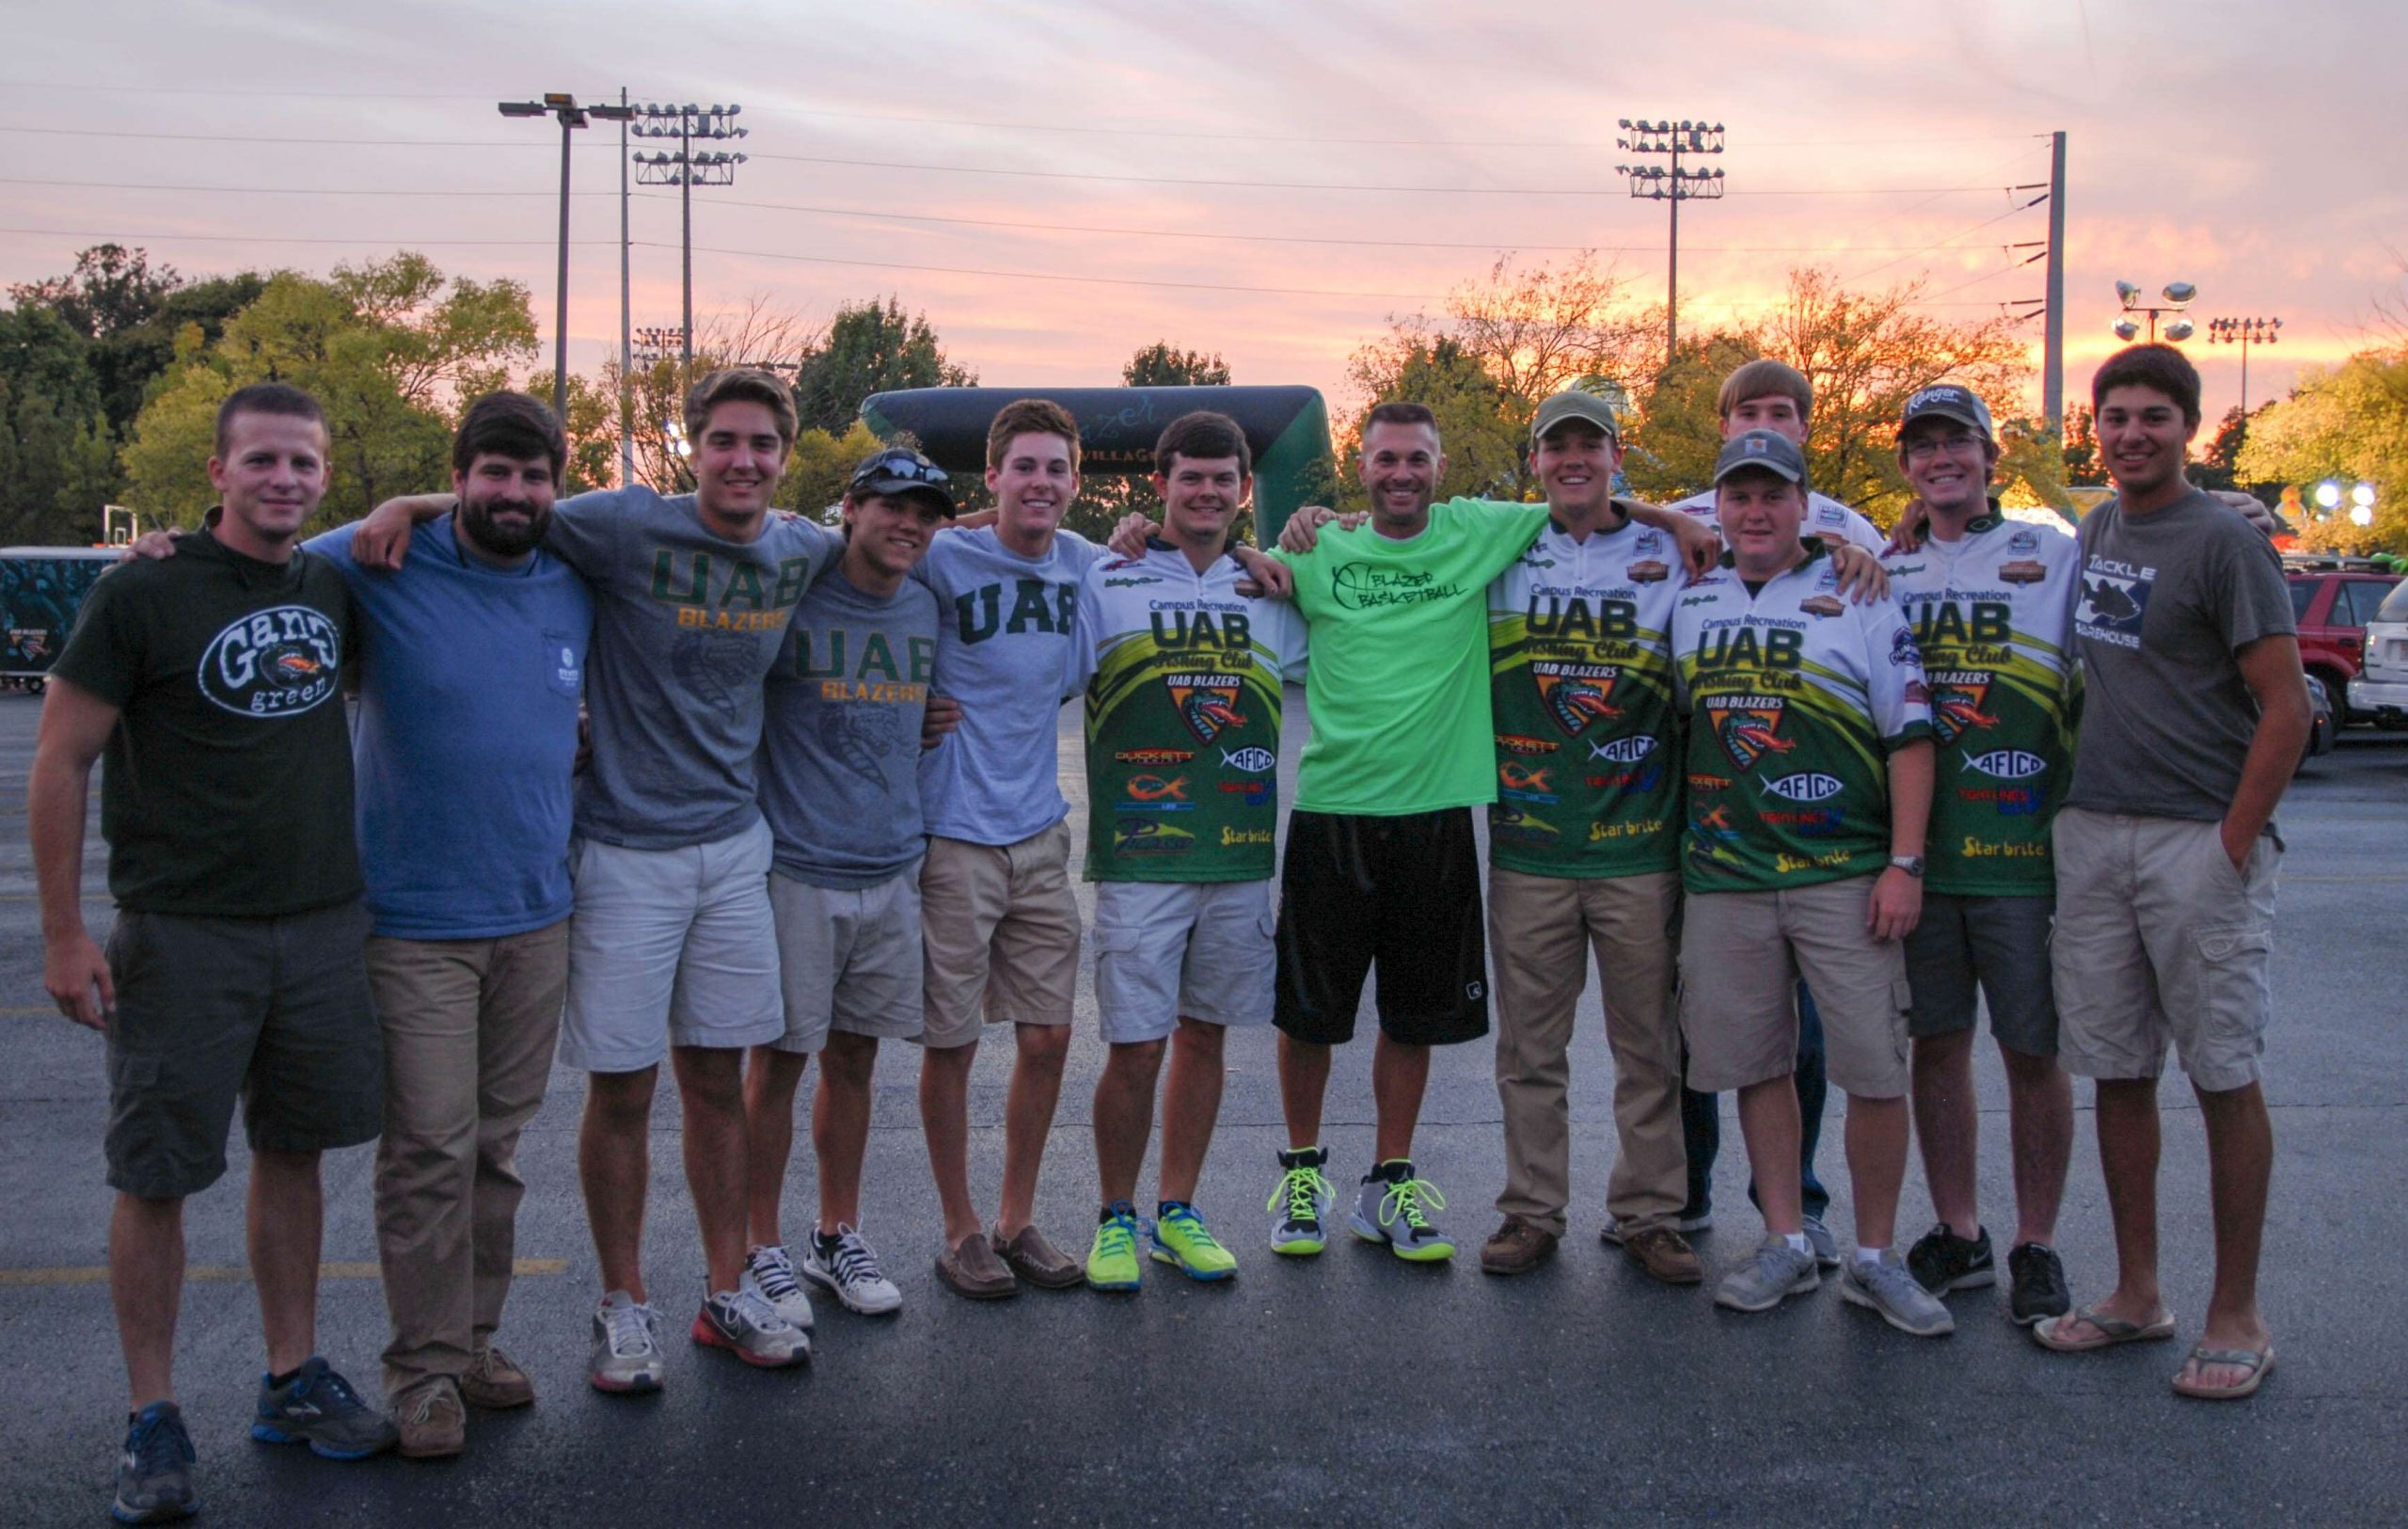 Randy made everybody get in front of the sunset for this picture. UAB's team consists of Dave Killough, Mason McAnnally, Austin Maynard, Wesley Minor, Trent Archie, Chris Hiott, Austin Handley, Alex Wolffe, Holton Bell,  and John Feazell, 